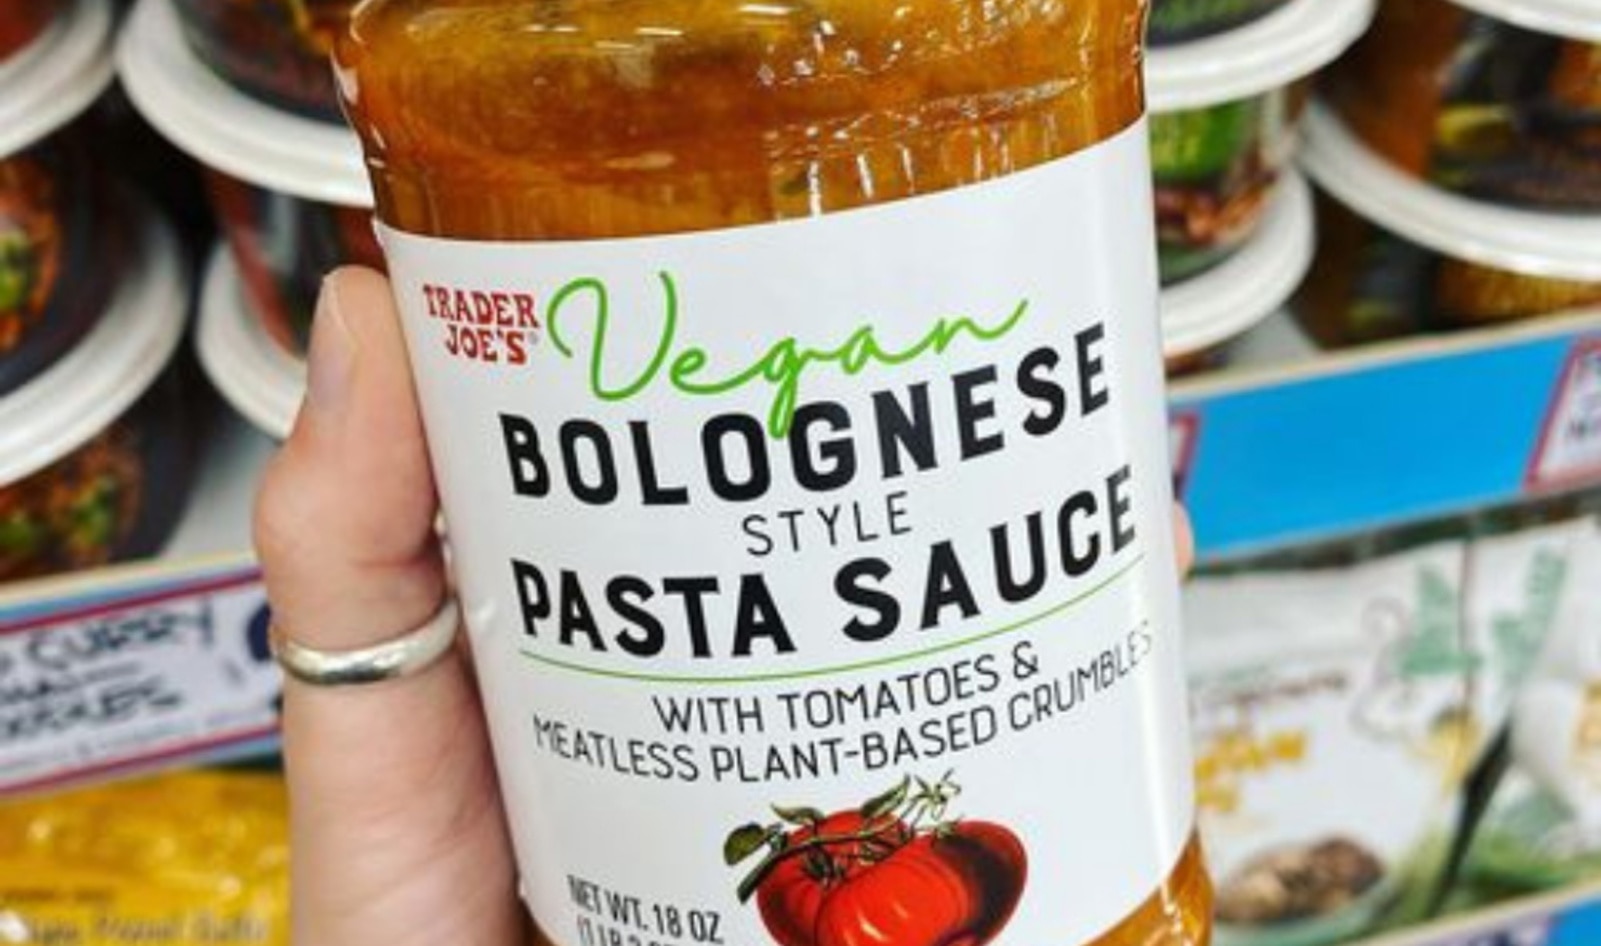 Trader Joe’s Just Launched a Meaty Vegan Bolognese Pasta Sauce